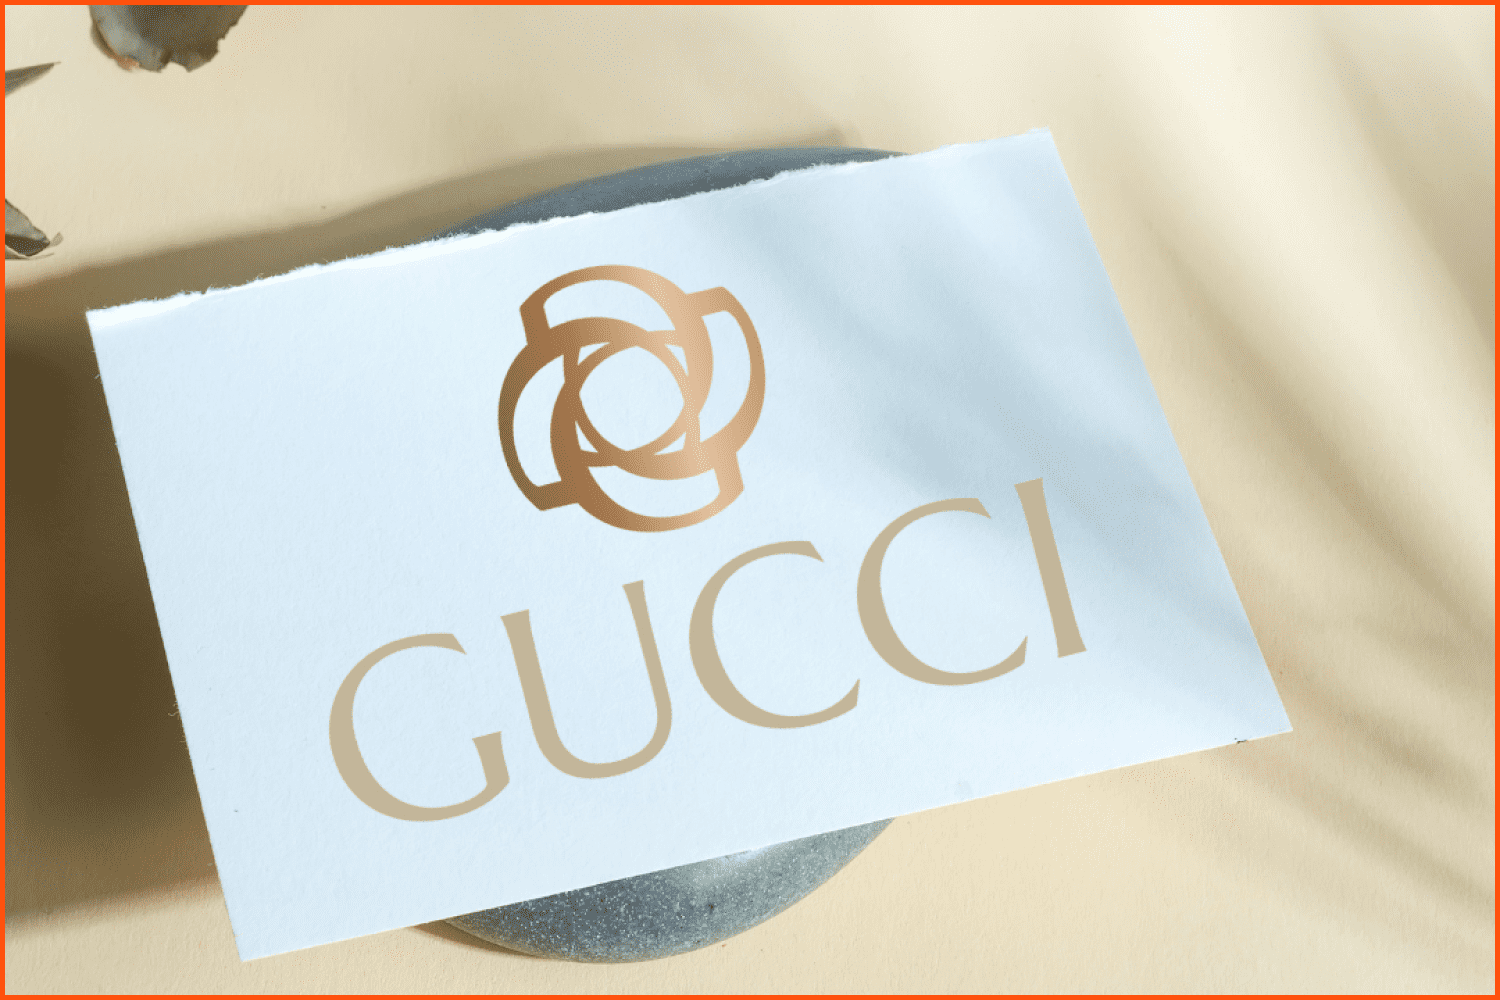 Logo and texture gucci luxury. The image represents a background